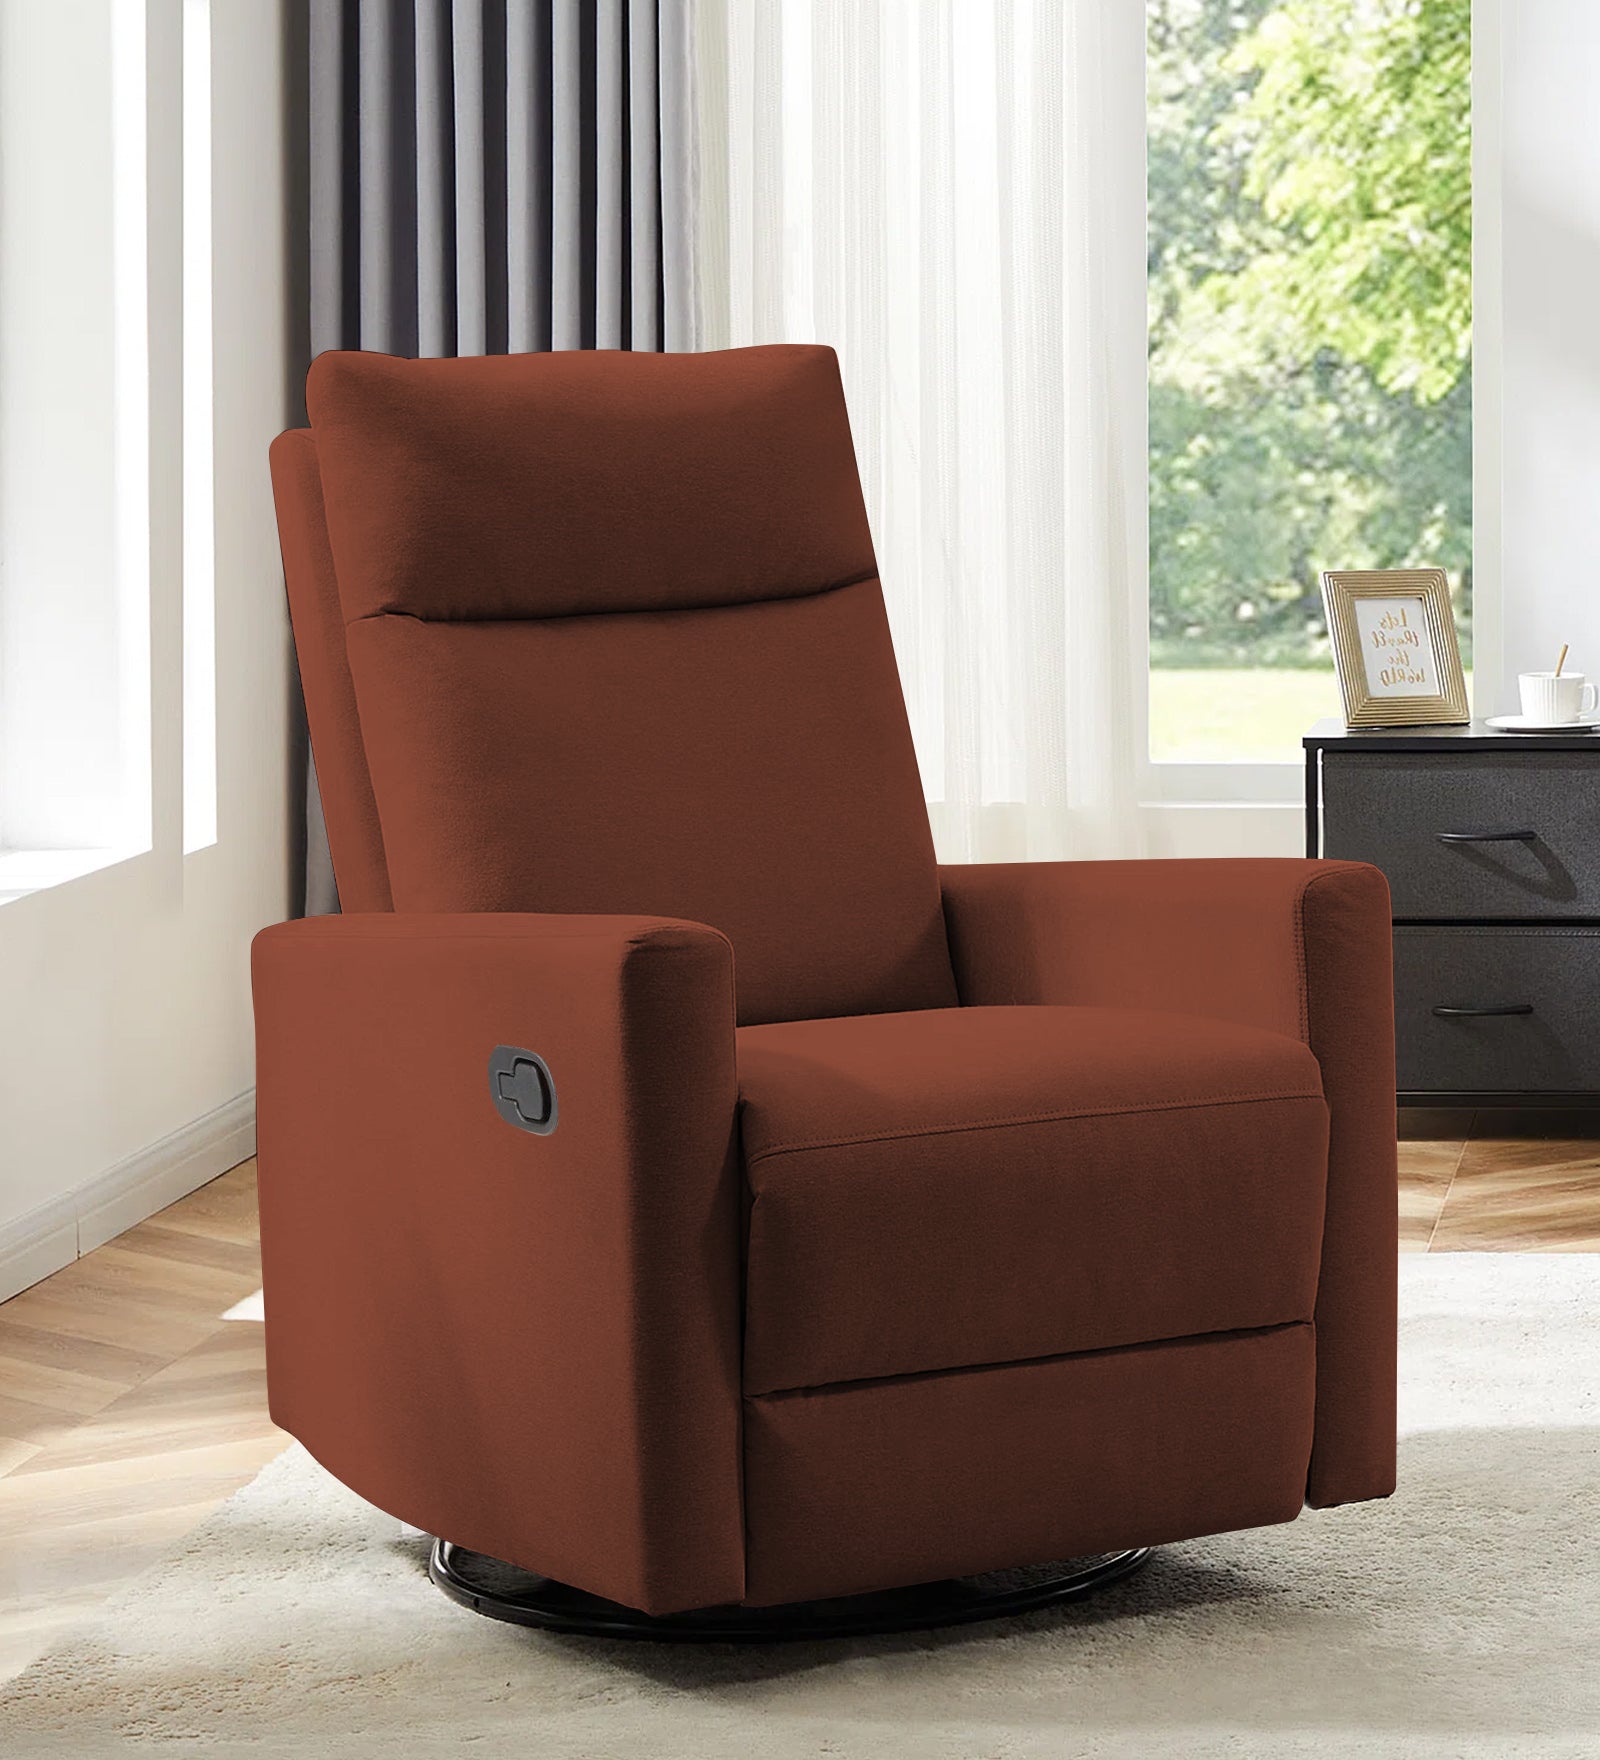 Zura Fabric Manual 1 Seater Recliner In Coffee Brown Colour